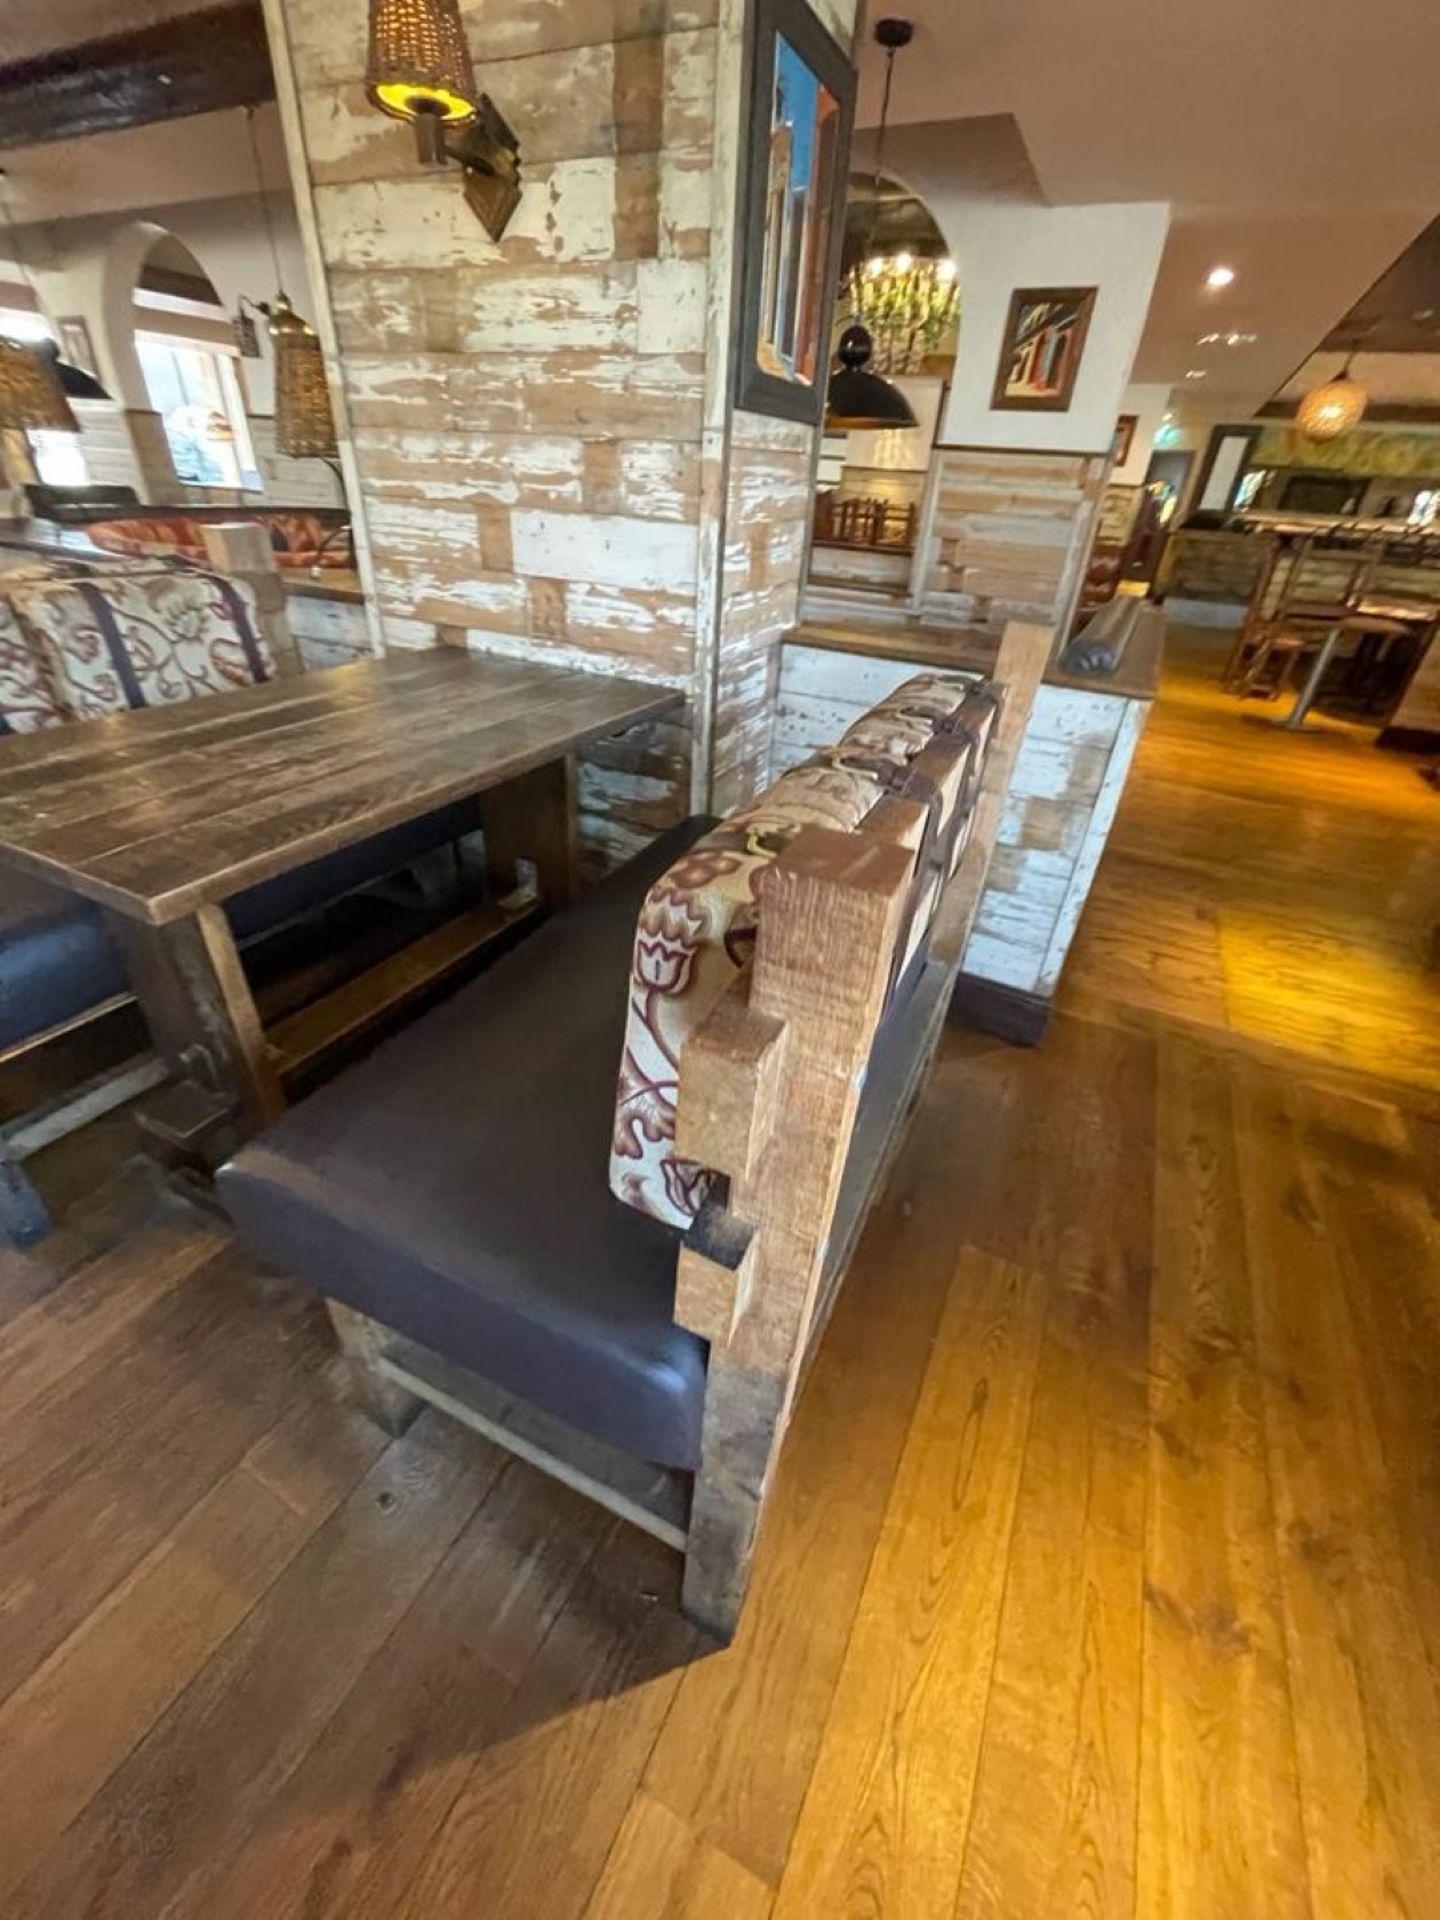 2 x Handcrafted Solid Wood Seating Benches With a Rustic Farmhouse Dining Table - Features Brown - Image 10 of 13